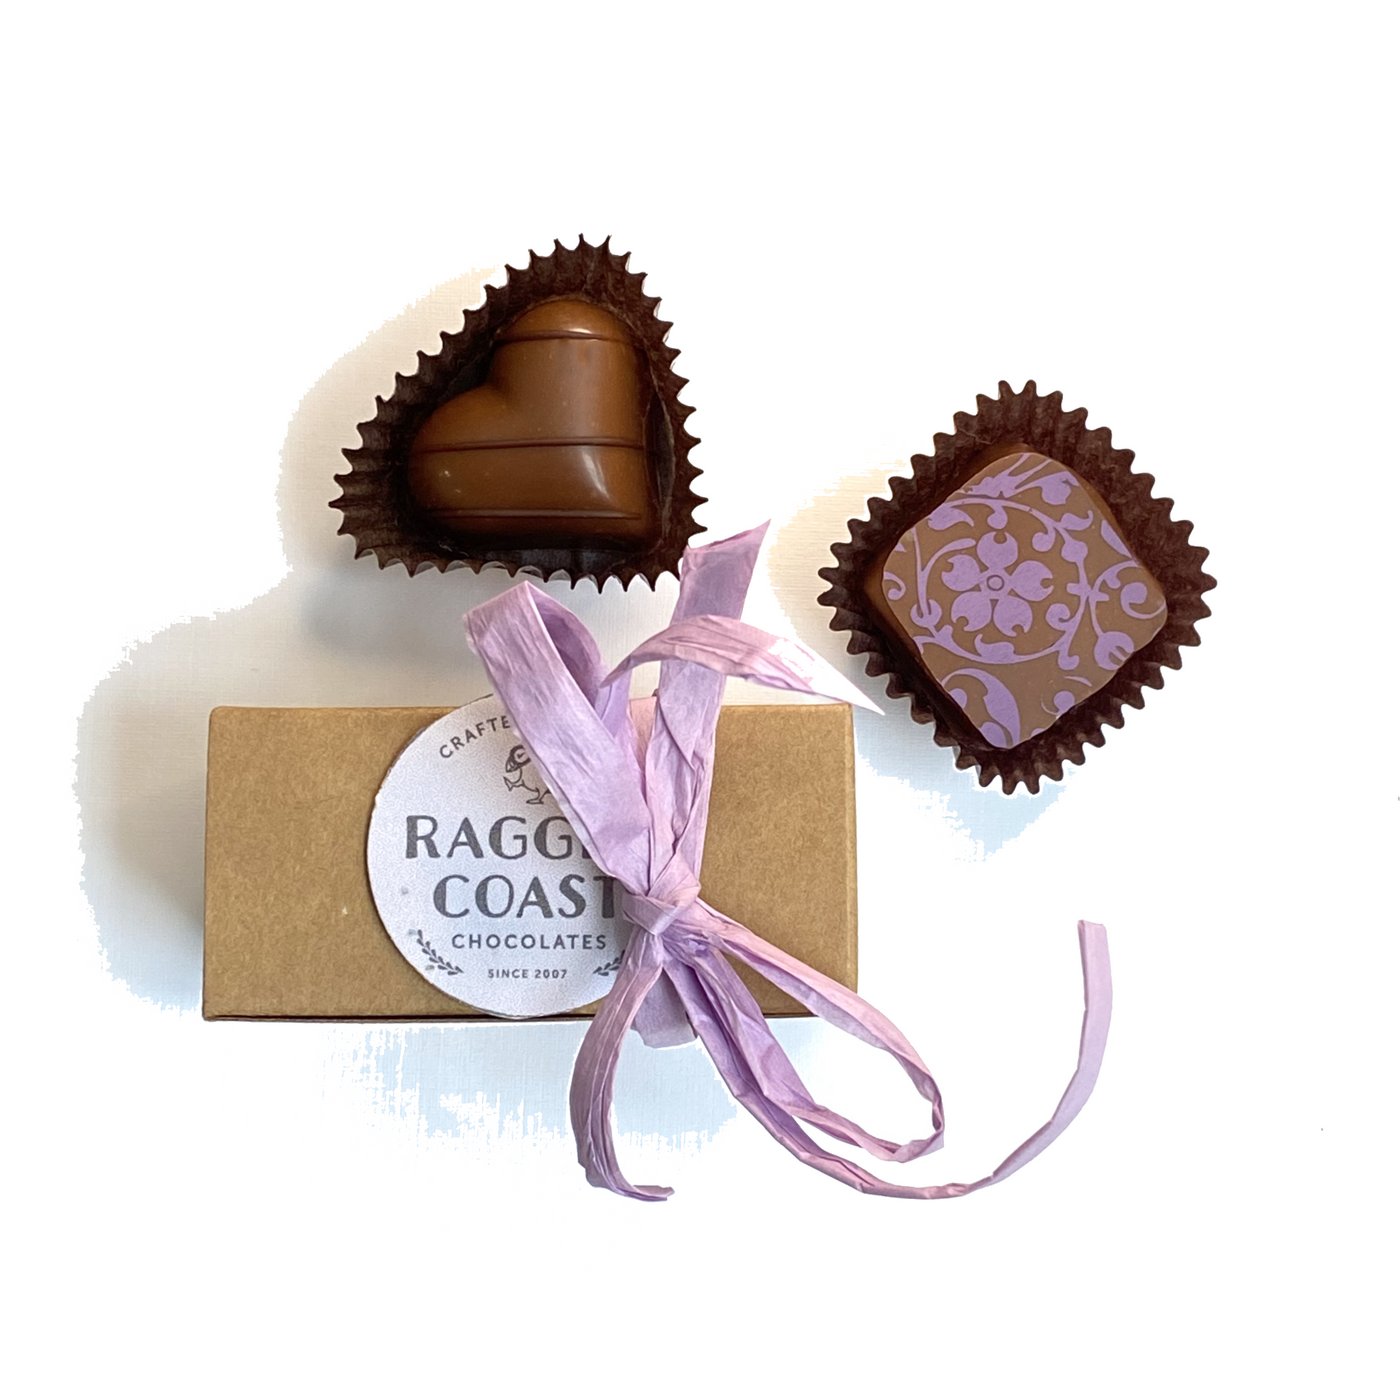 One Dozen Kraft 2-Piece Chocolate Party Favors or Thank You Gifts - Chocolatier's Choice